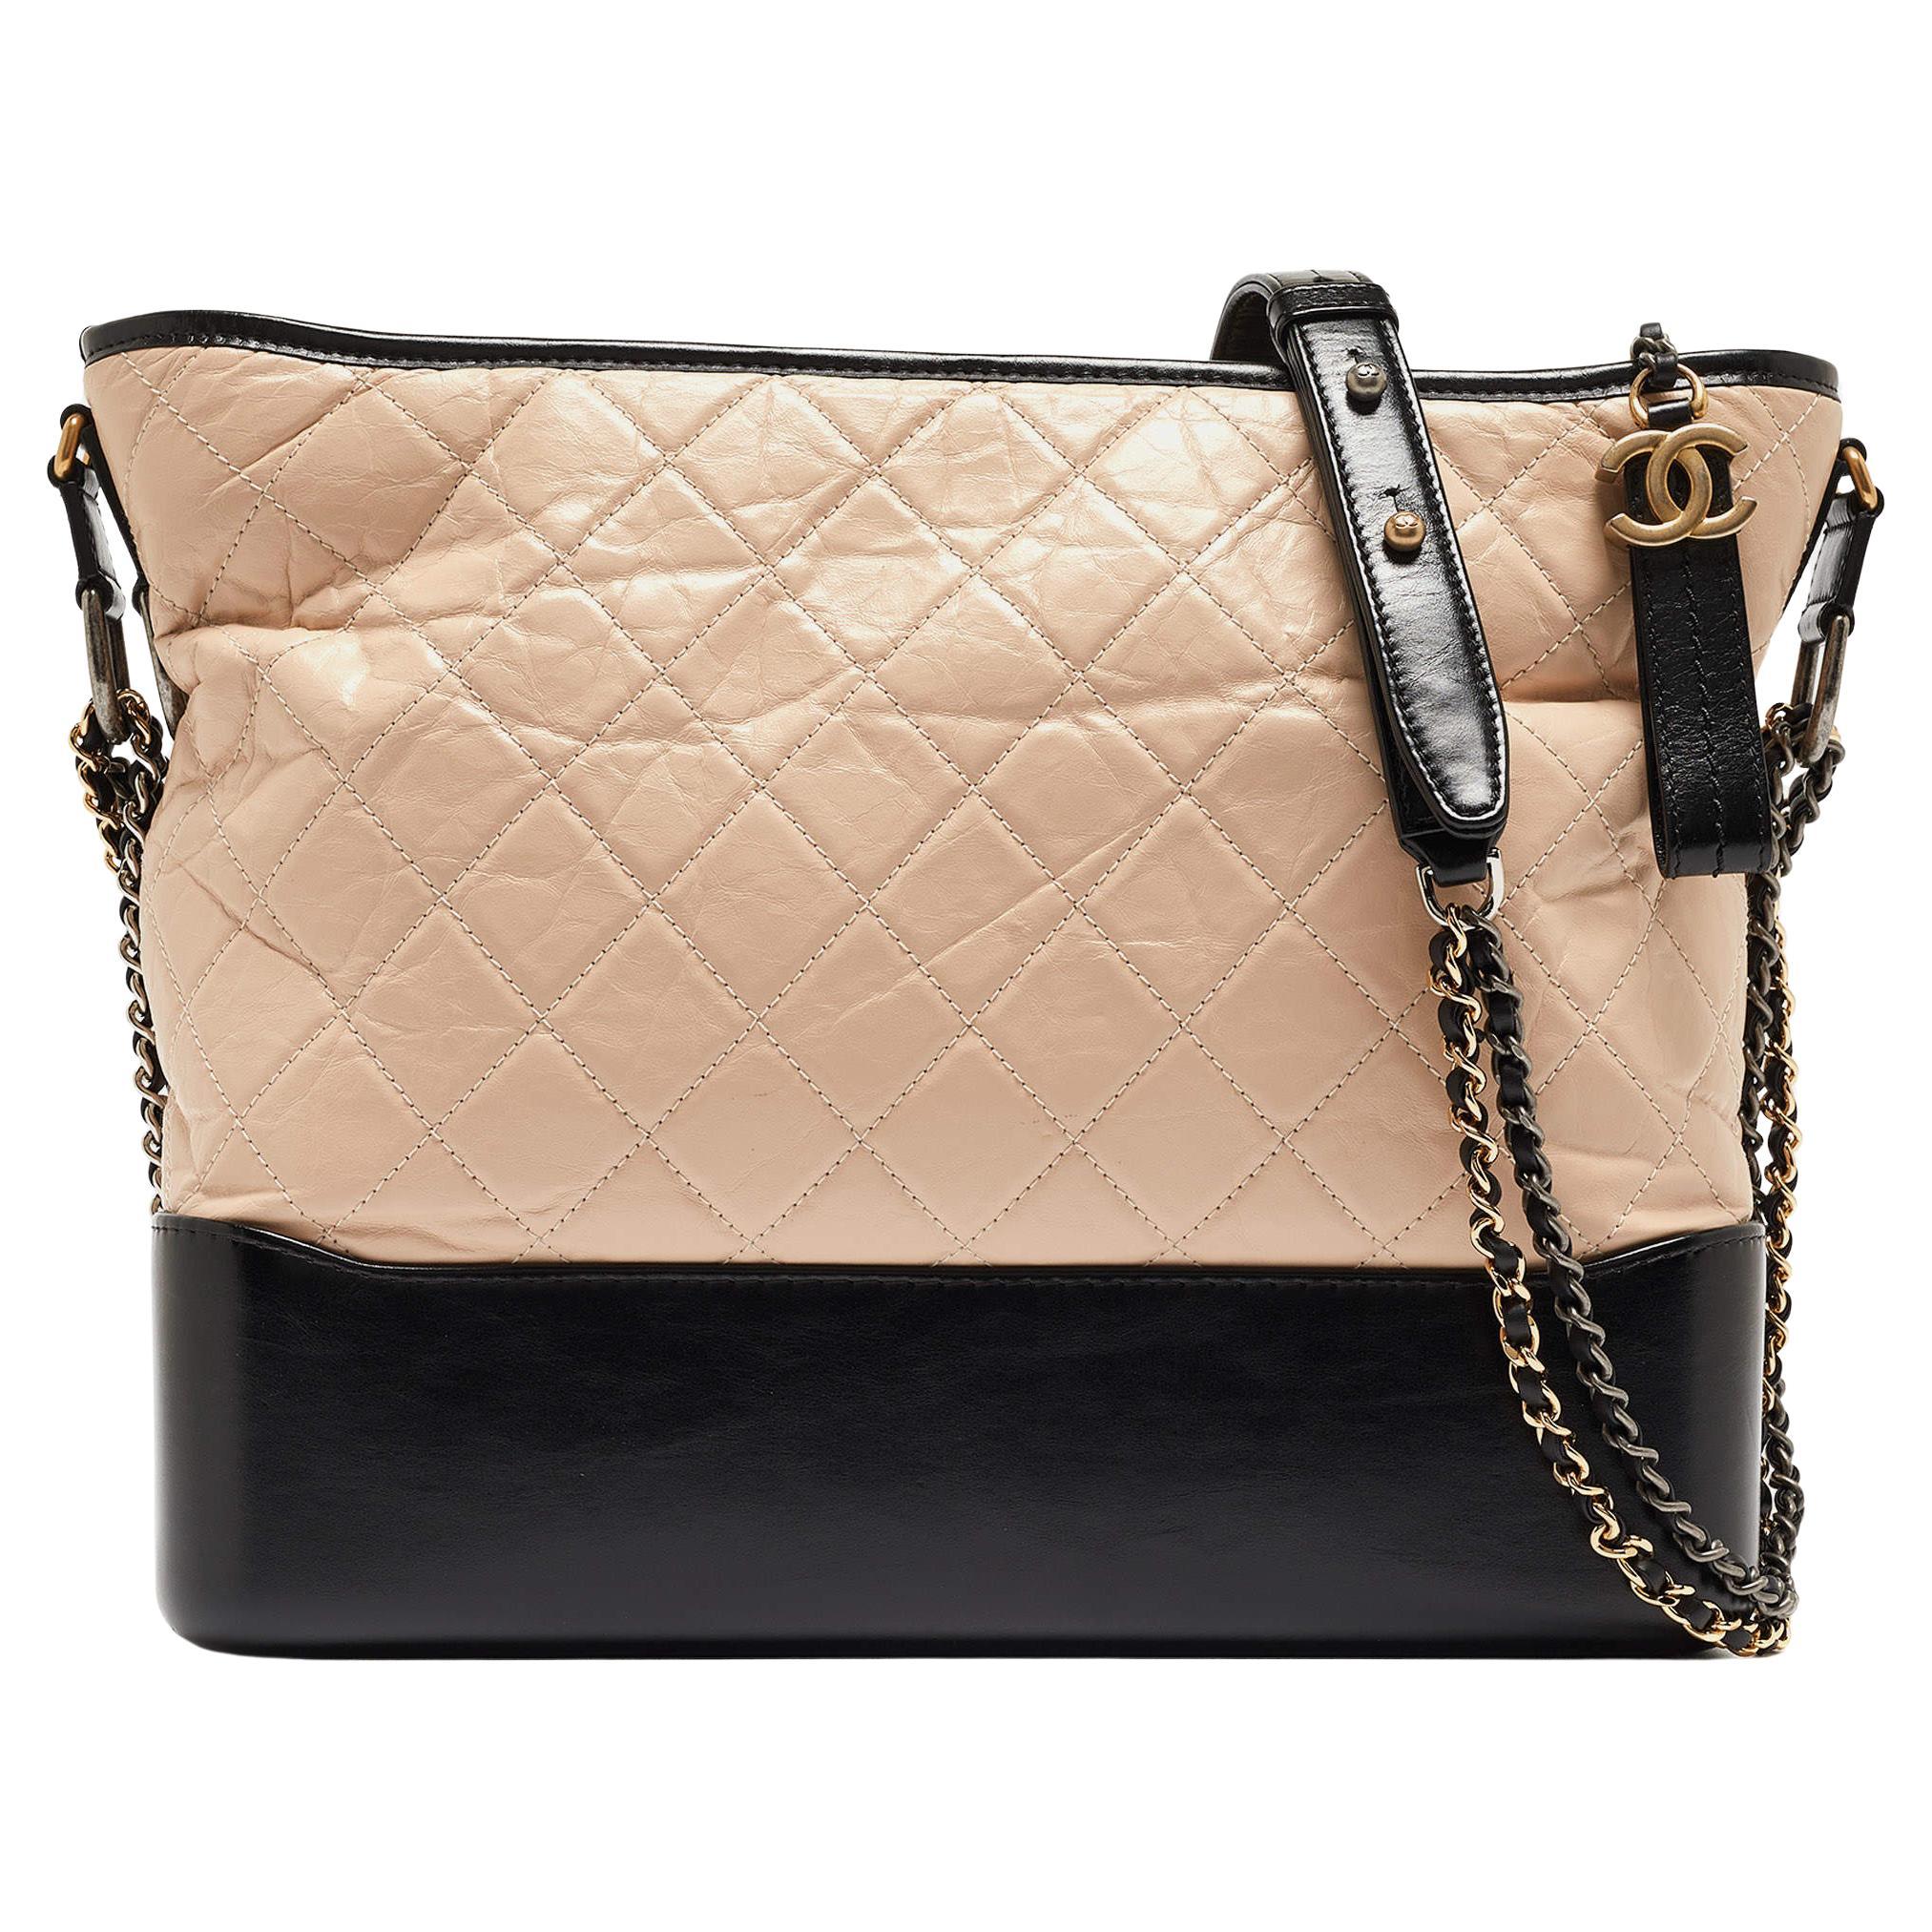 Chanel Black/Light Pink Quilted Leather Large Gabrielle Hobo For Sale